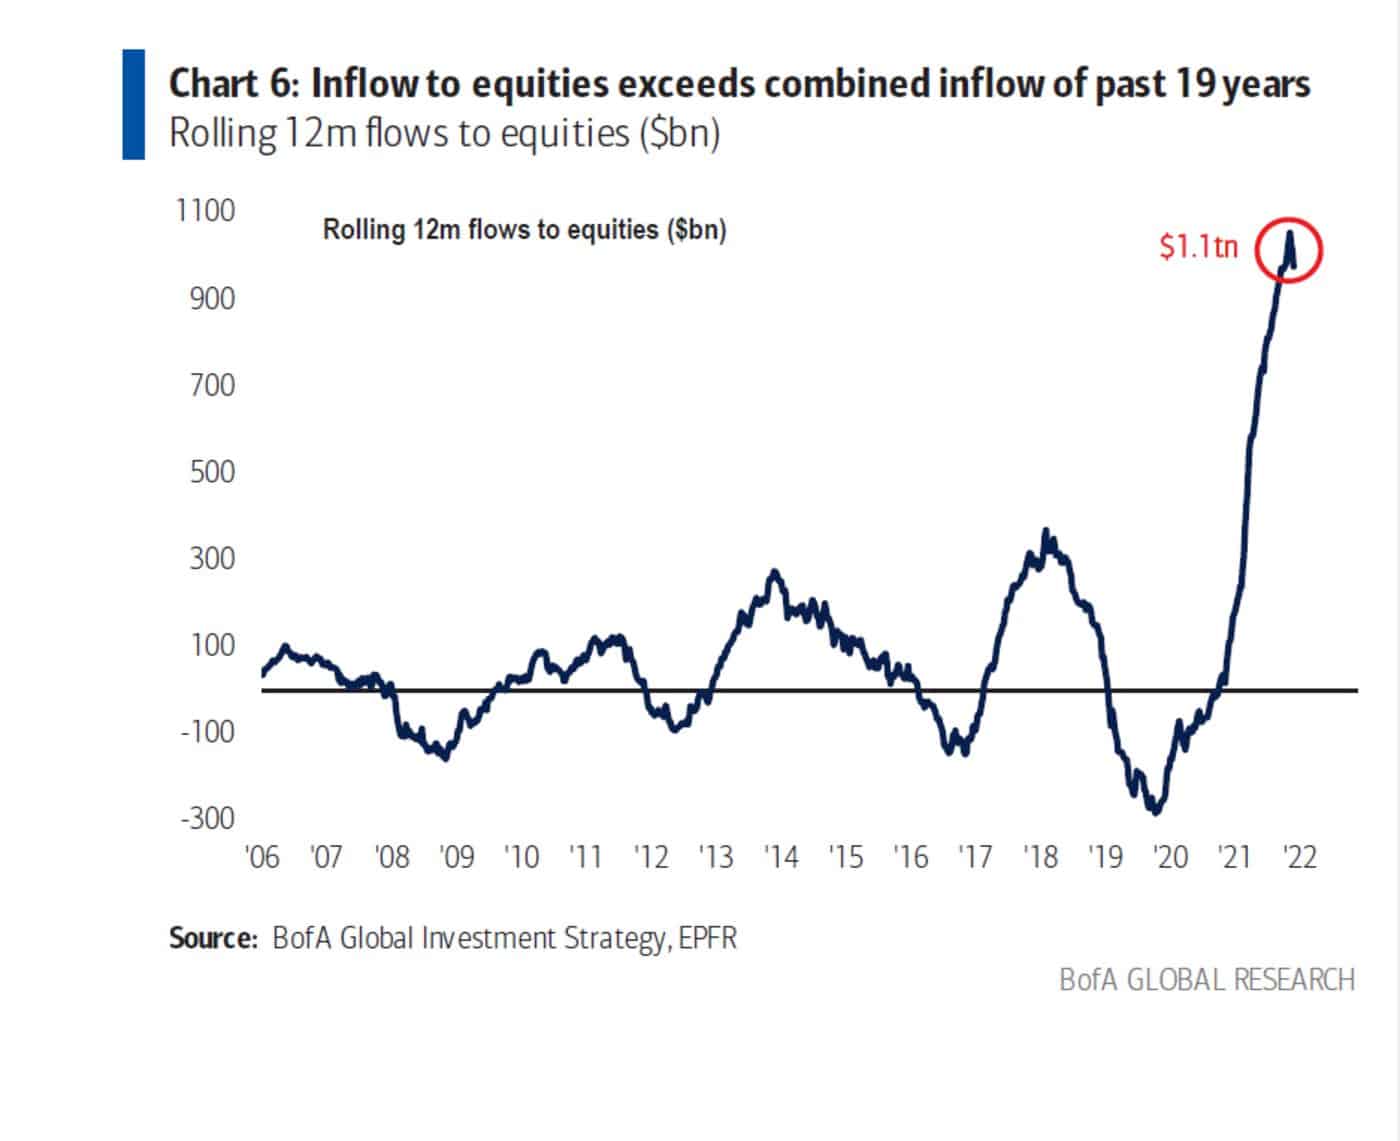 Chart of inflow to equities exceeds from 2006 to 2021.